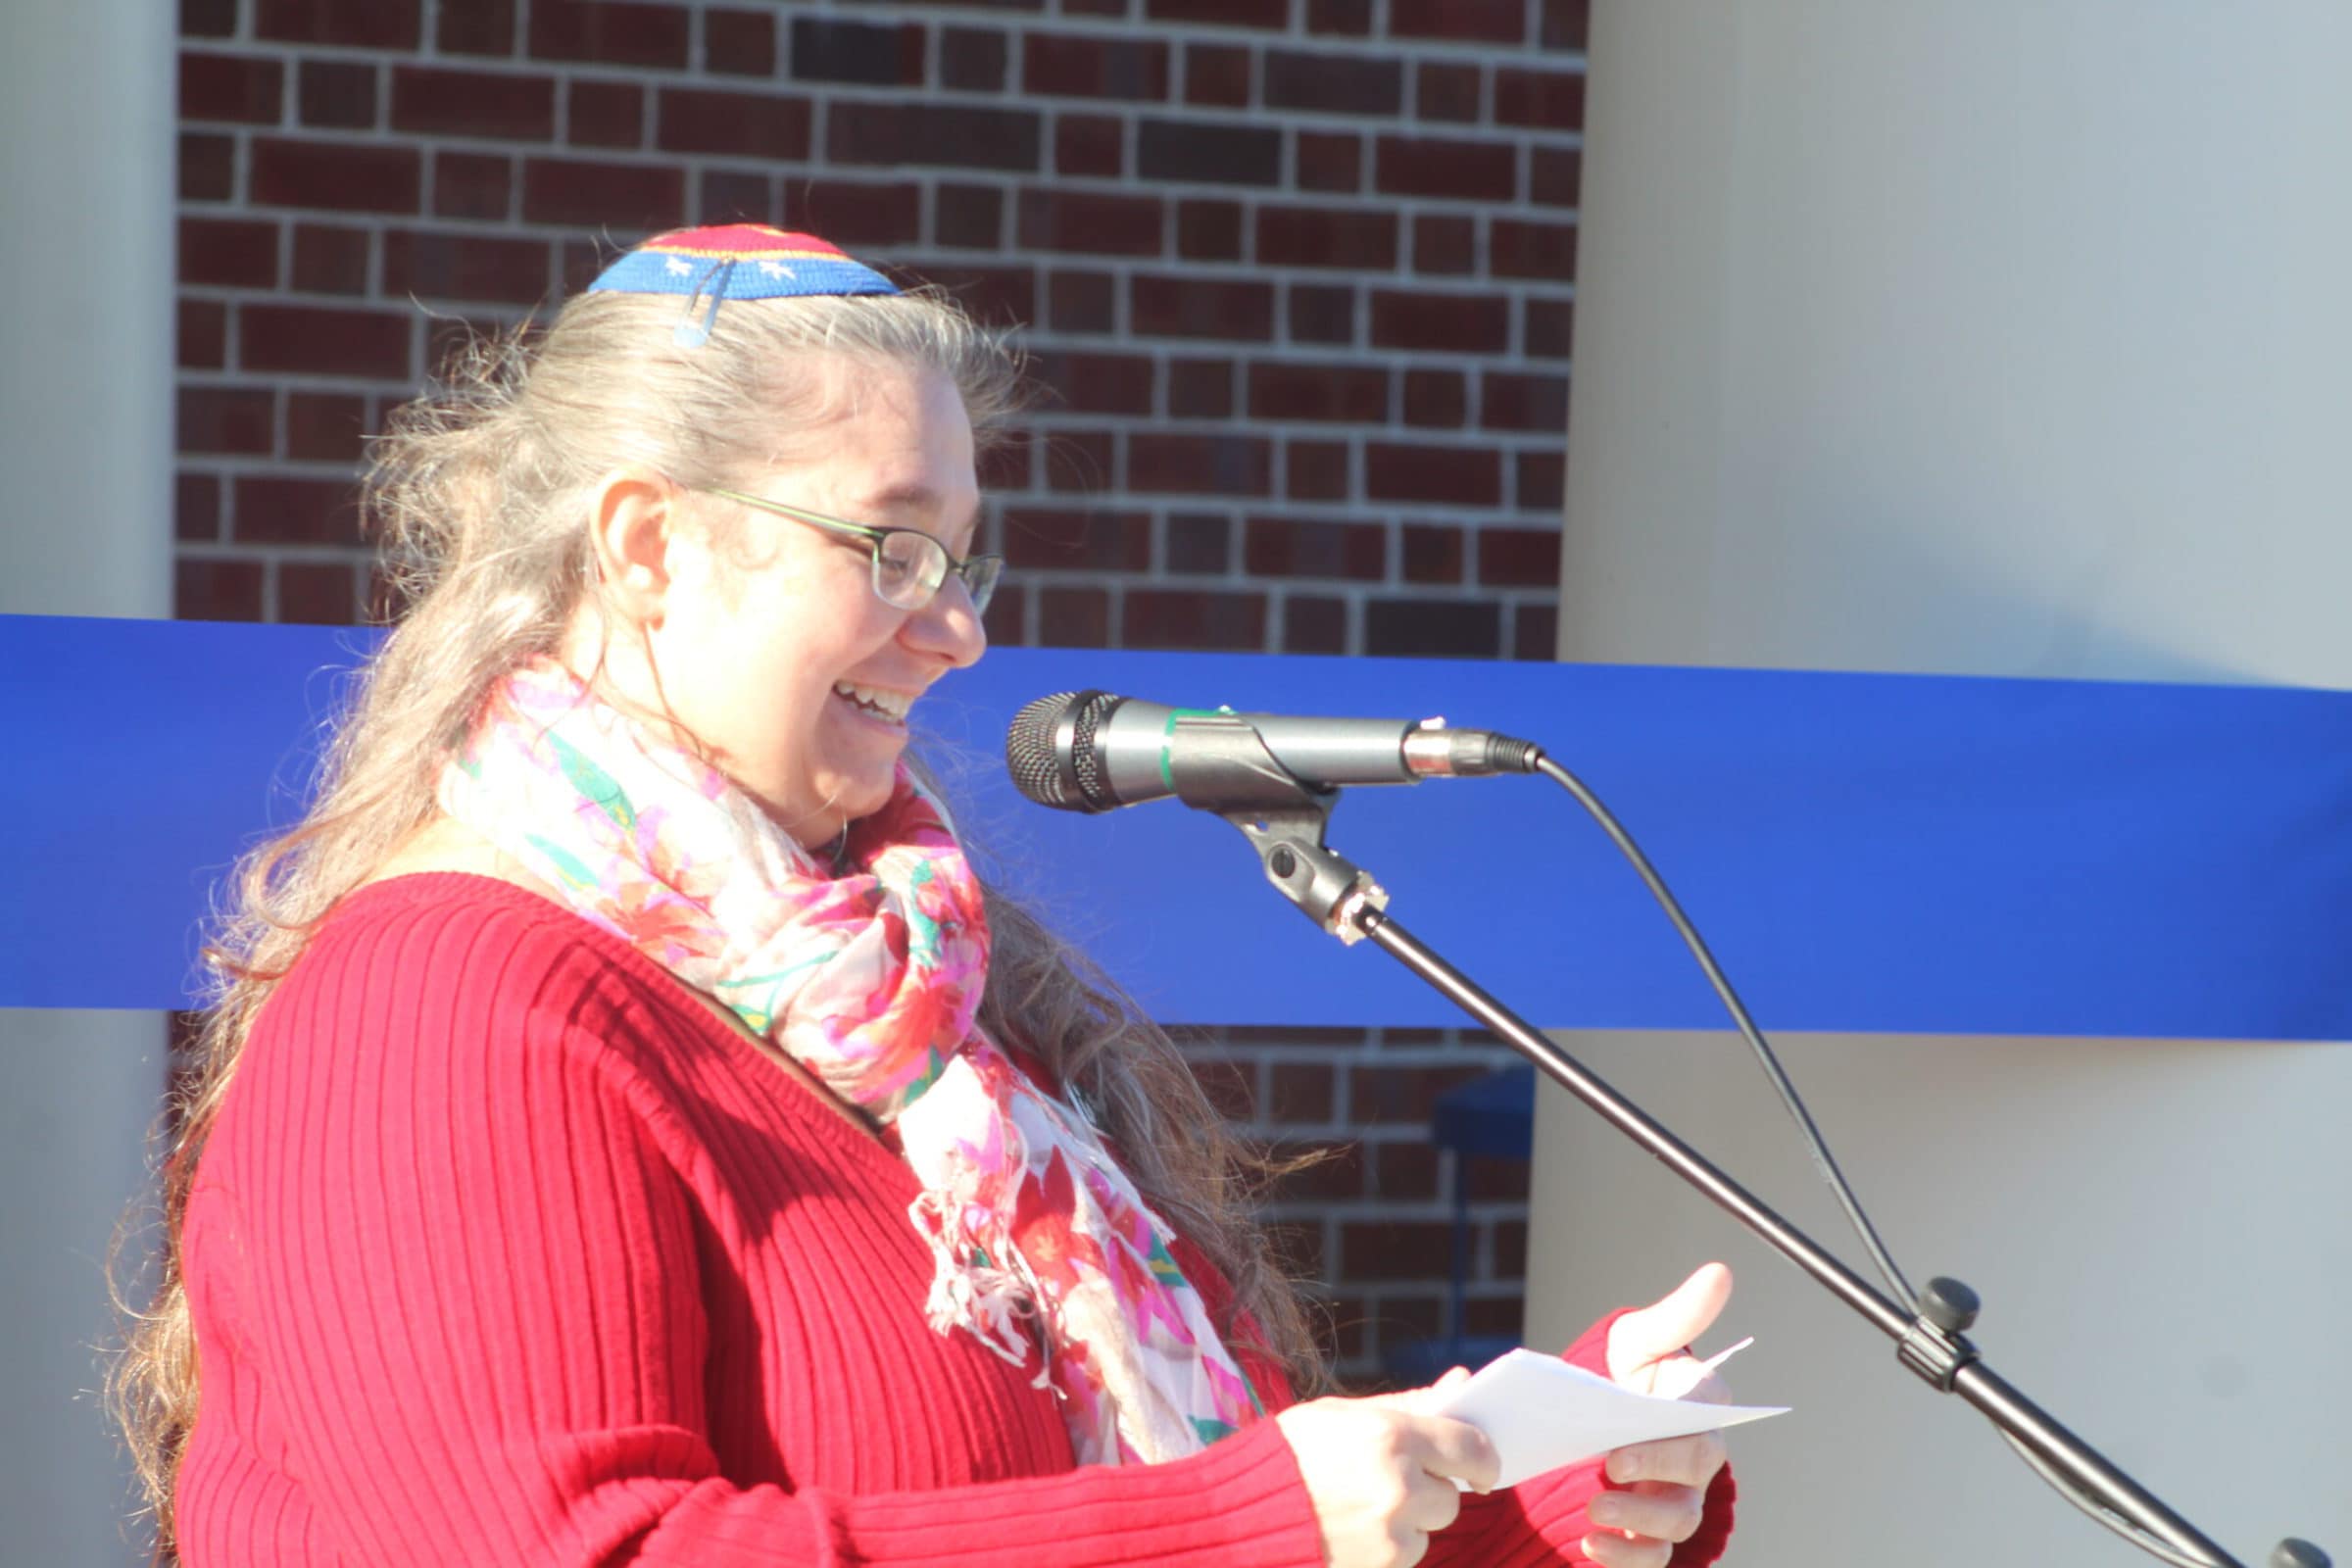 ‘Welcome home’: Grafton celebrates new library